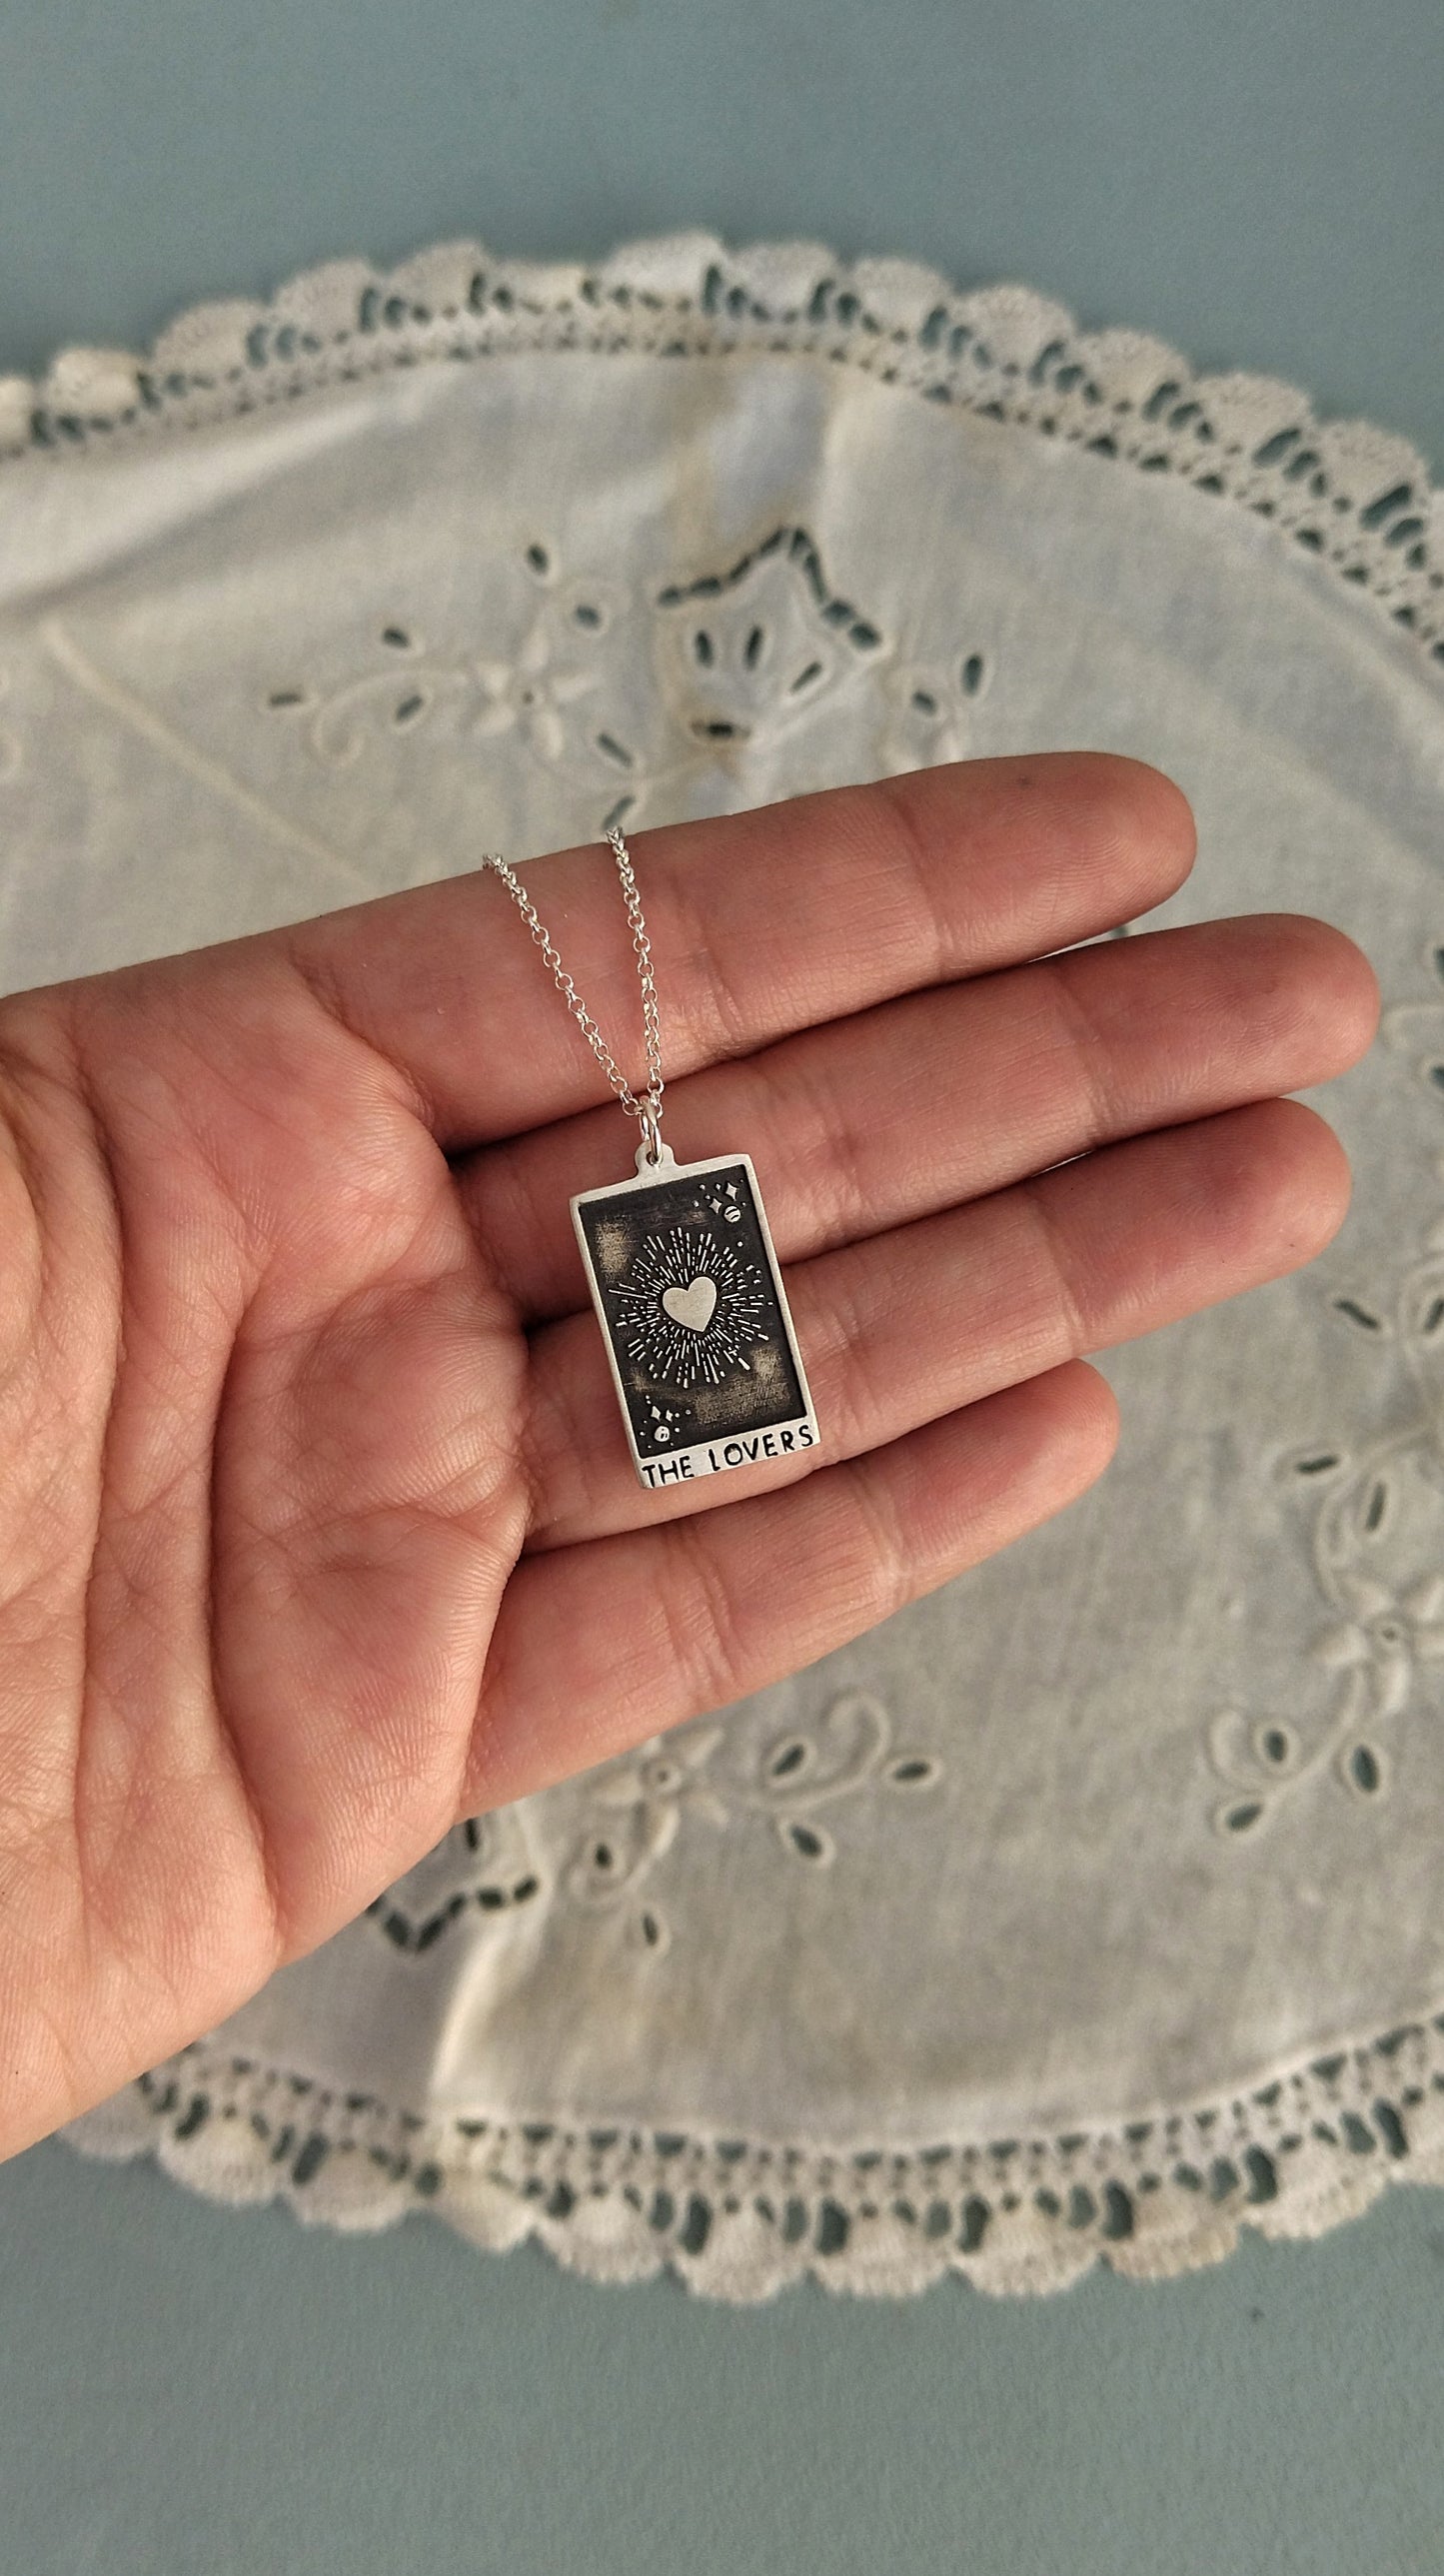 "The Lovers" Tarot Card Necklace